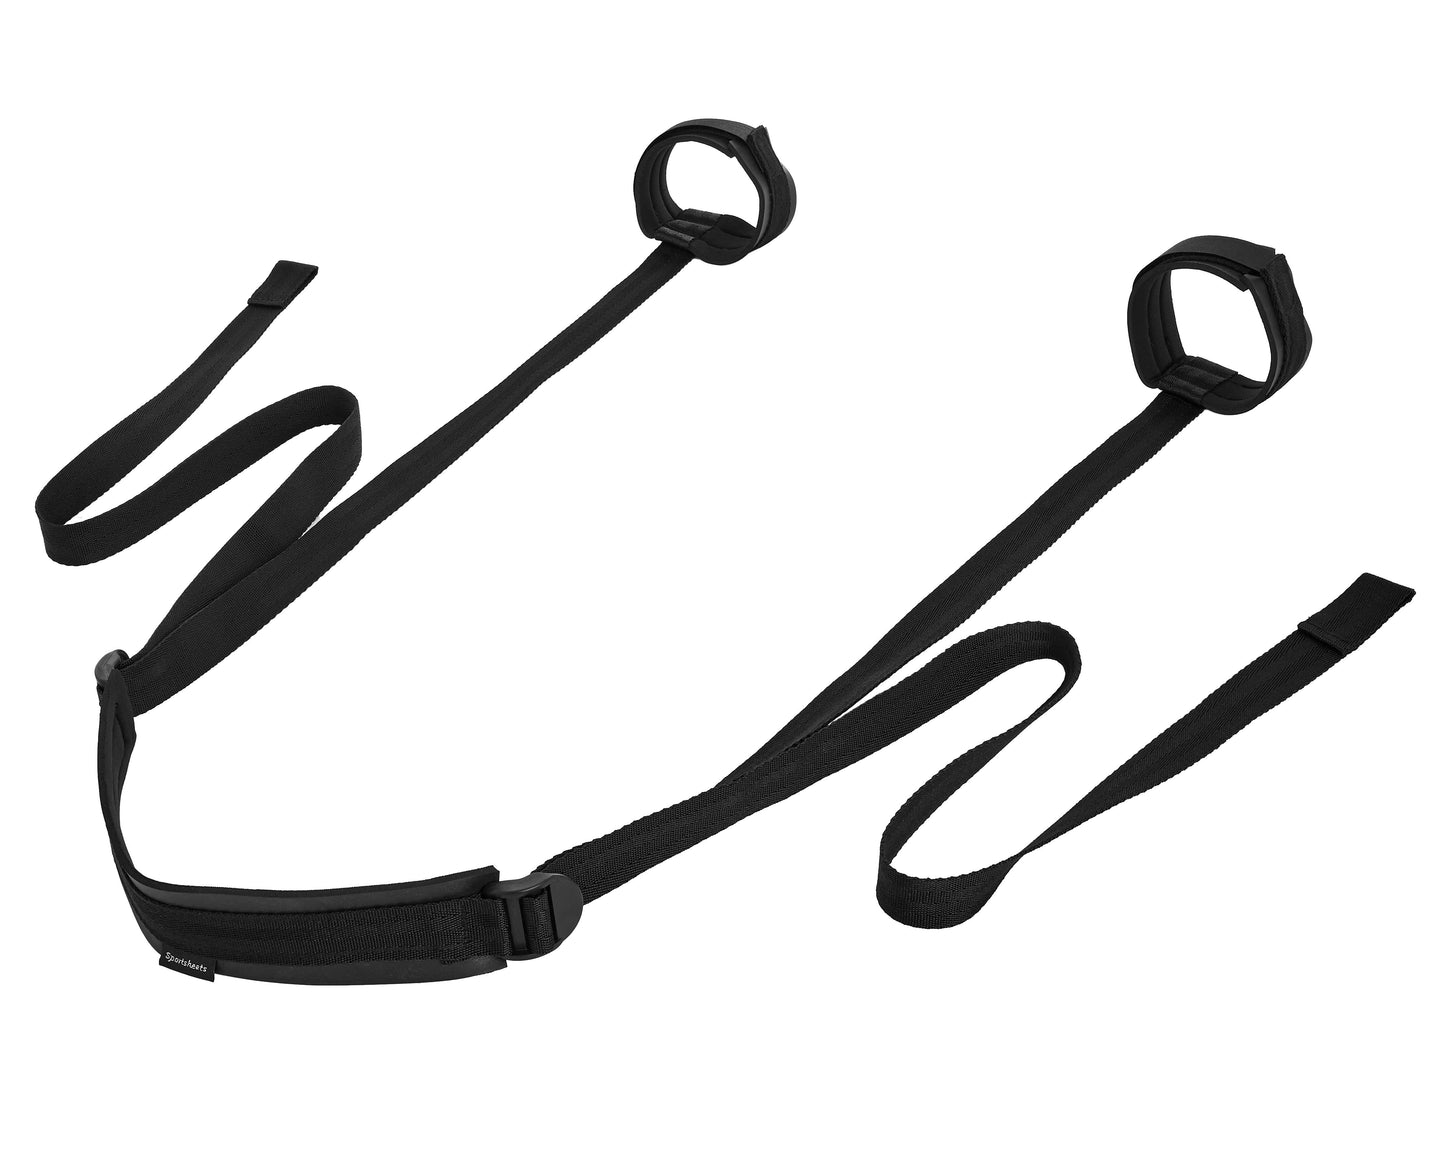 Side angle view of the sling showing its length.